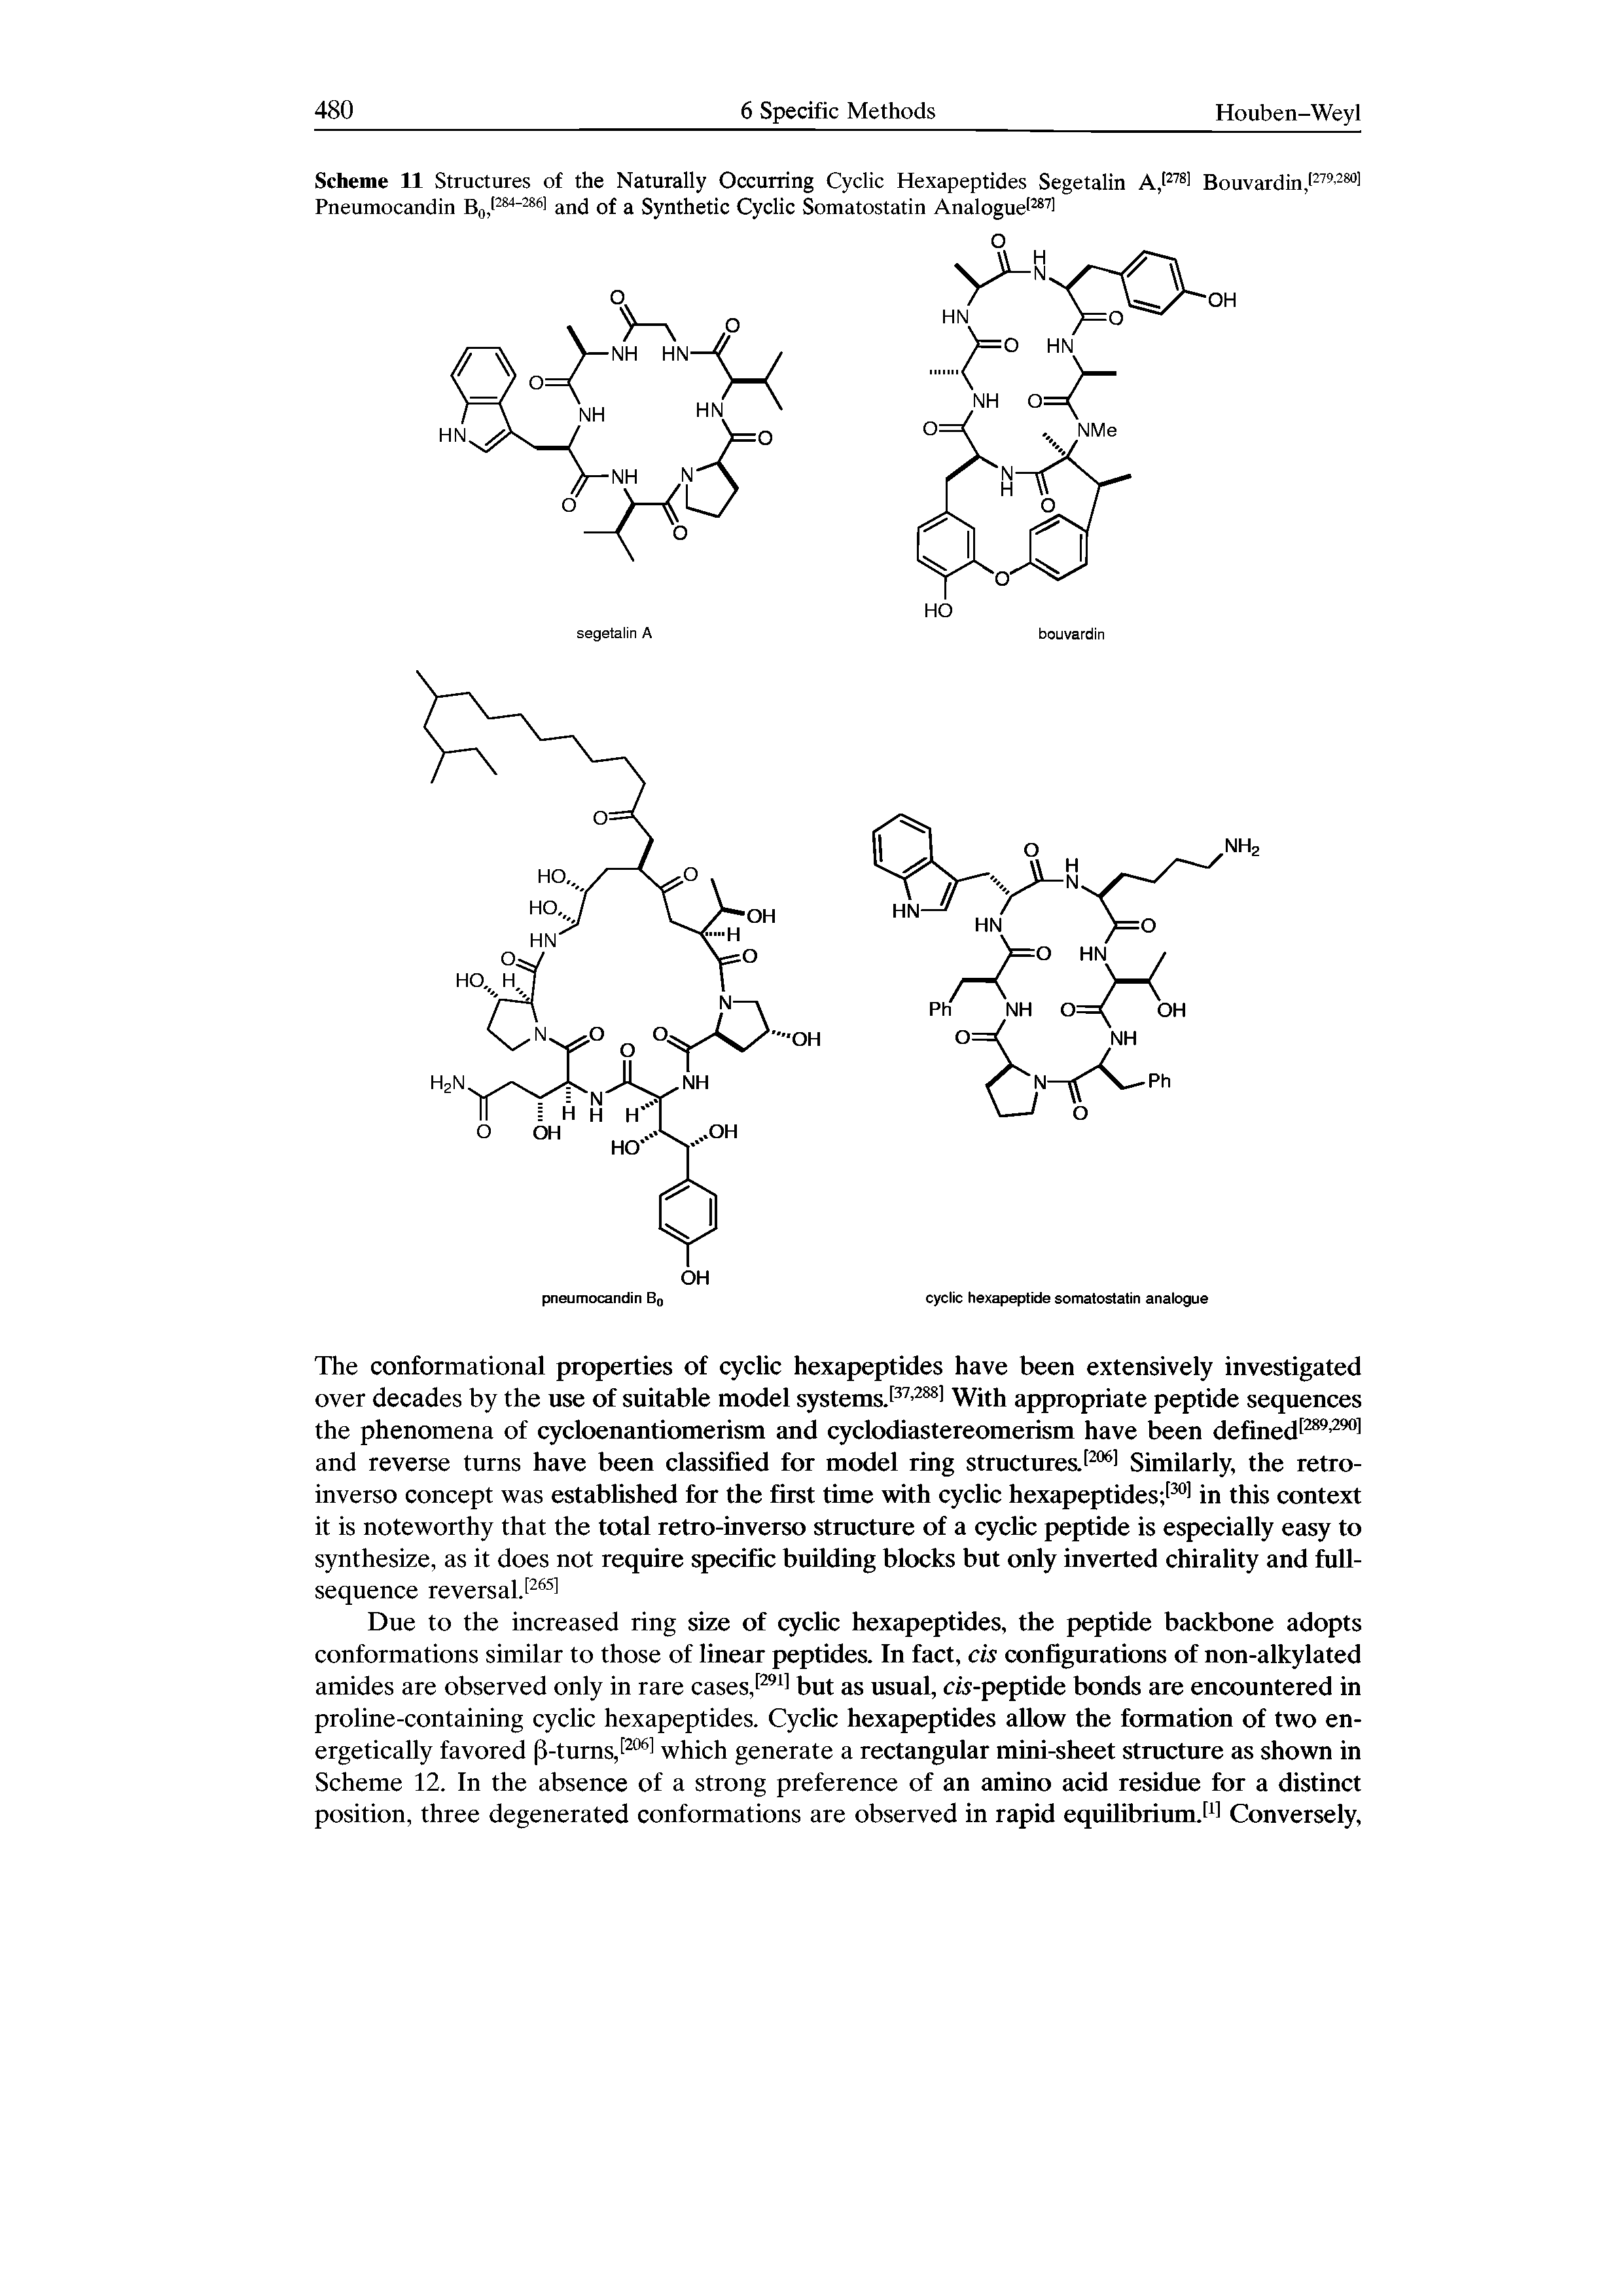 Scheme 11 Structures of the Naturally Occurring Cyclic Hexapeptides Segetalin A, 2781 Bouvardin, 279-2801 Pneumocandin b, 284-2861 and of a Synthetic Cyclic Somatostatin Analogue 2871...